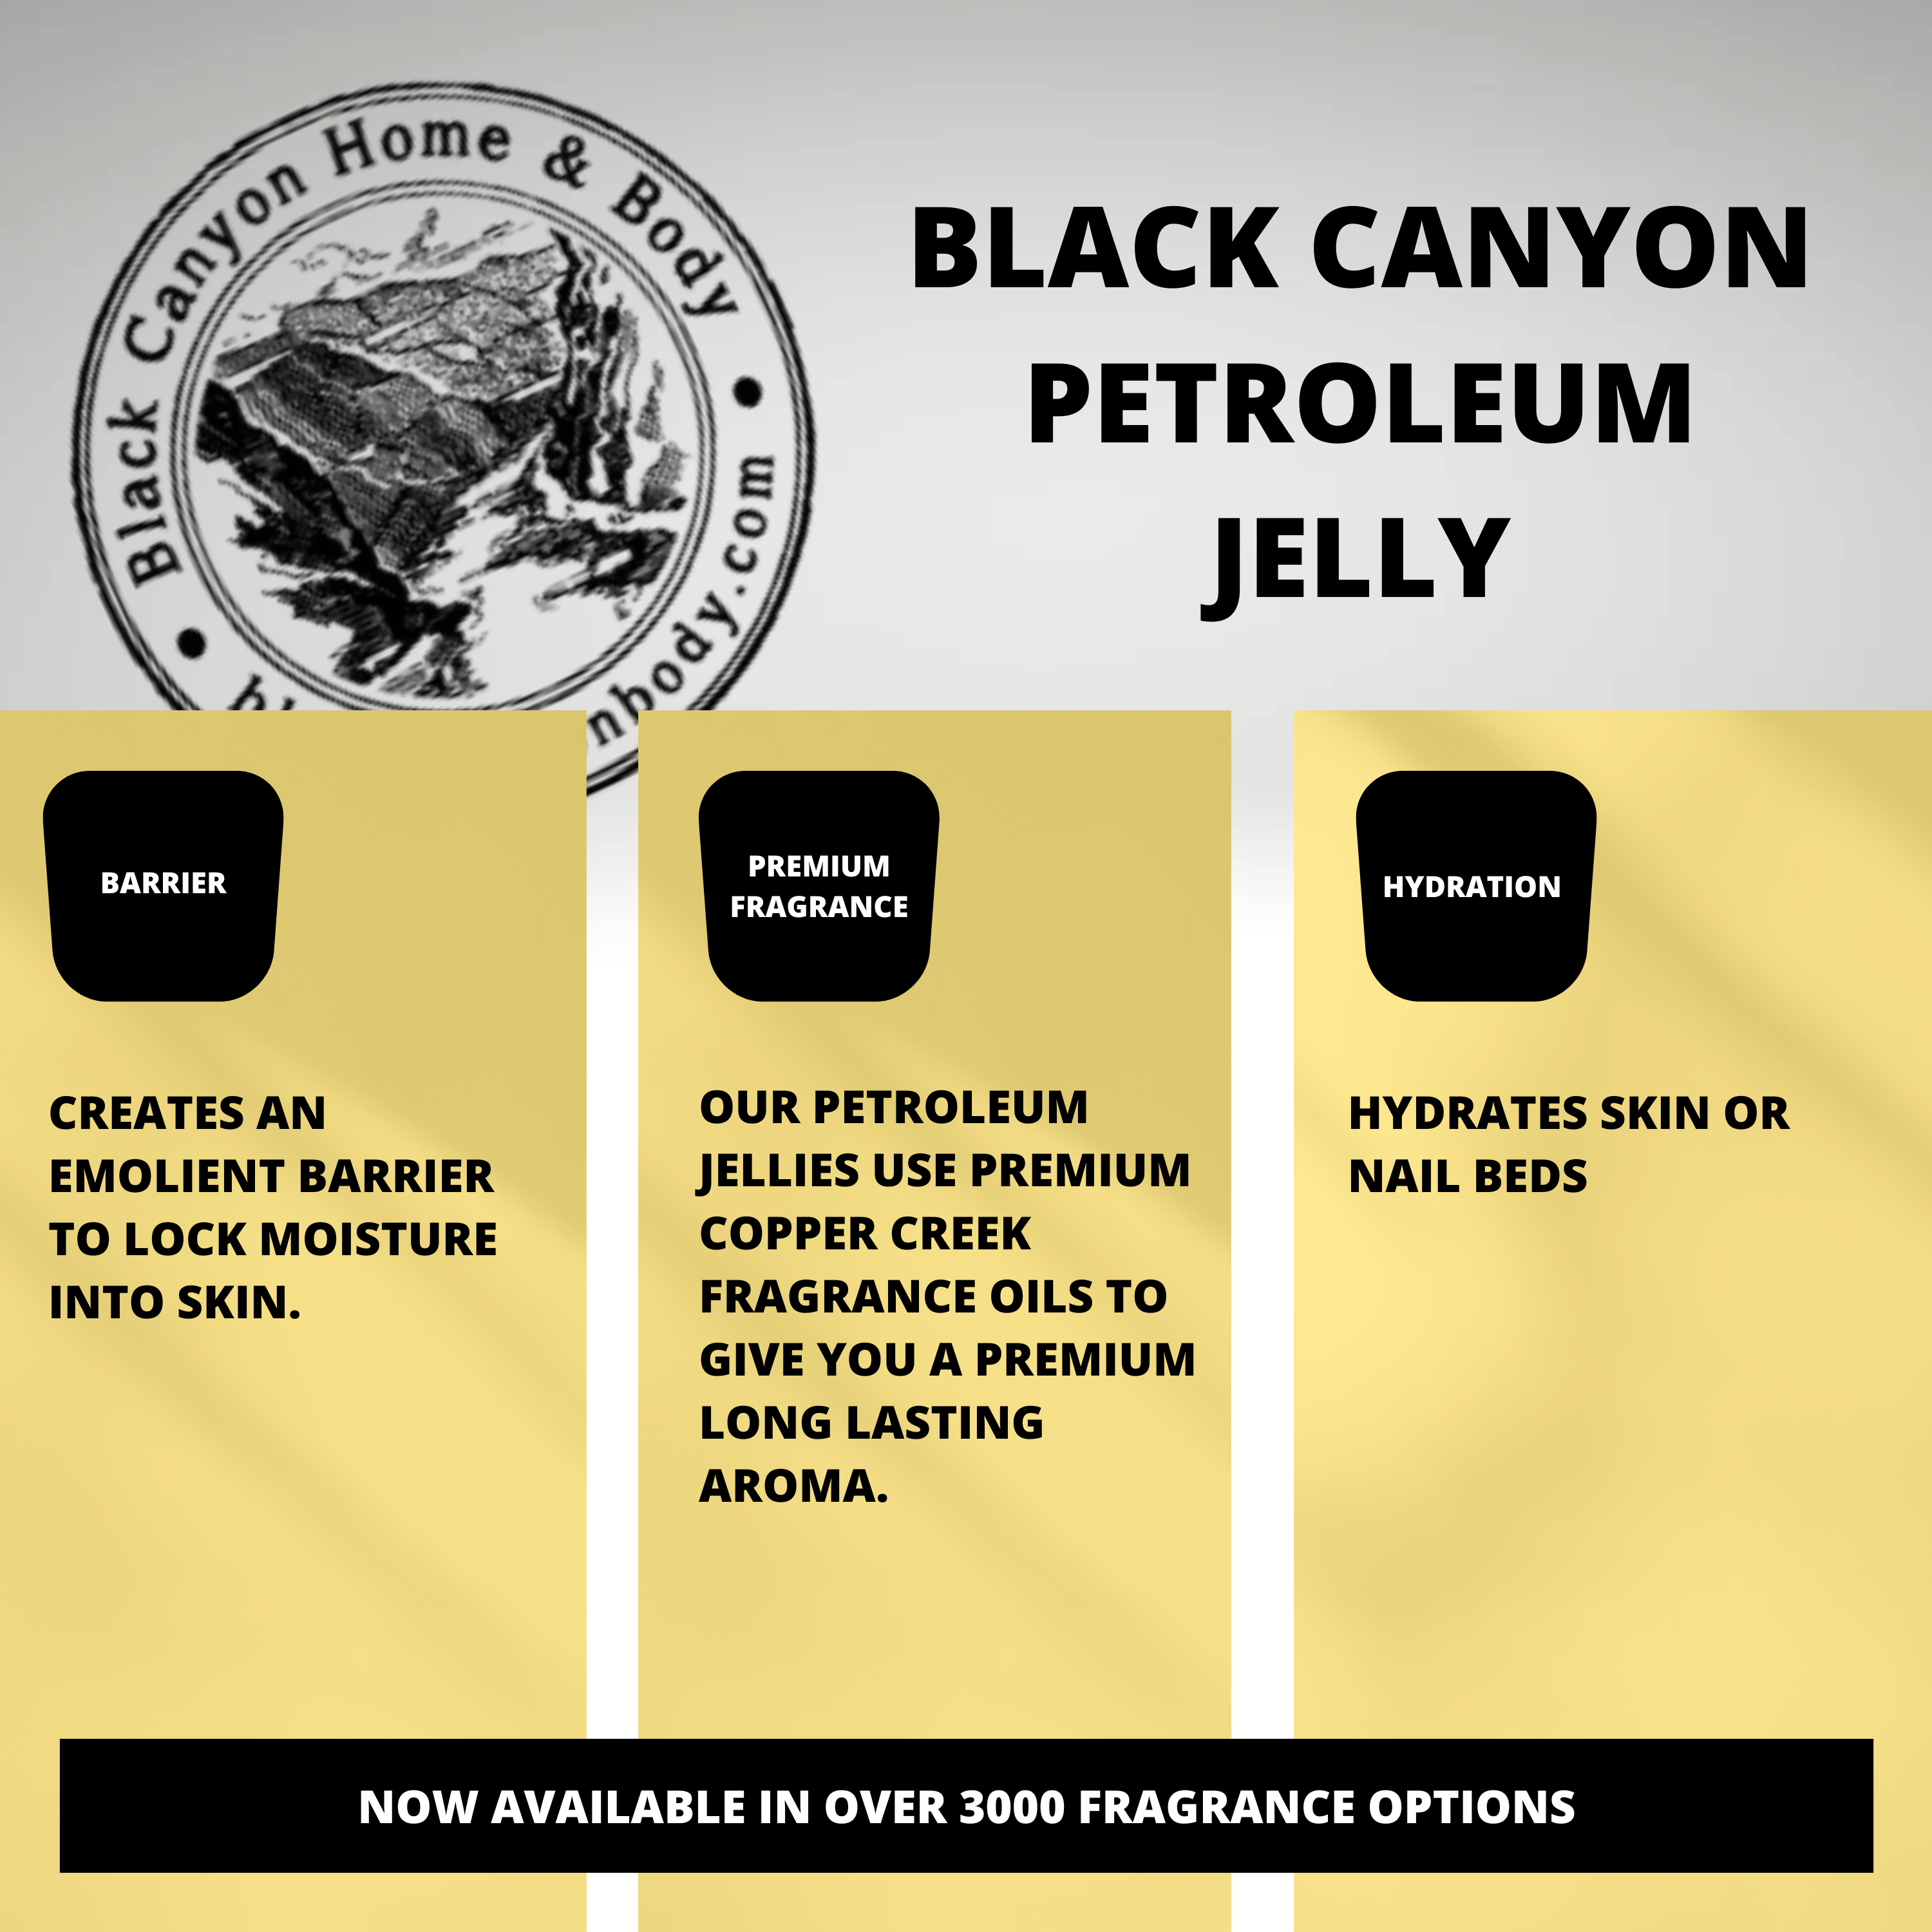 Black Canyon Blueberry Pancakes Scented Petroleum Jelly